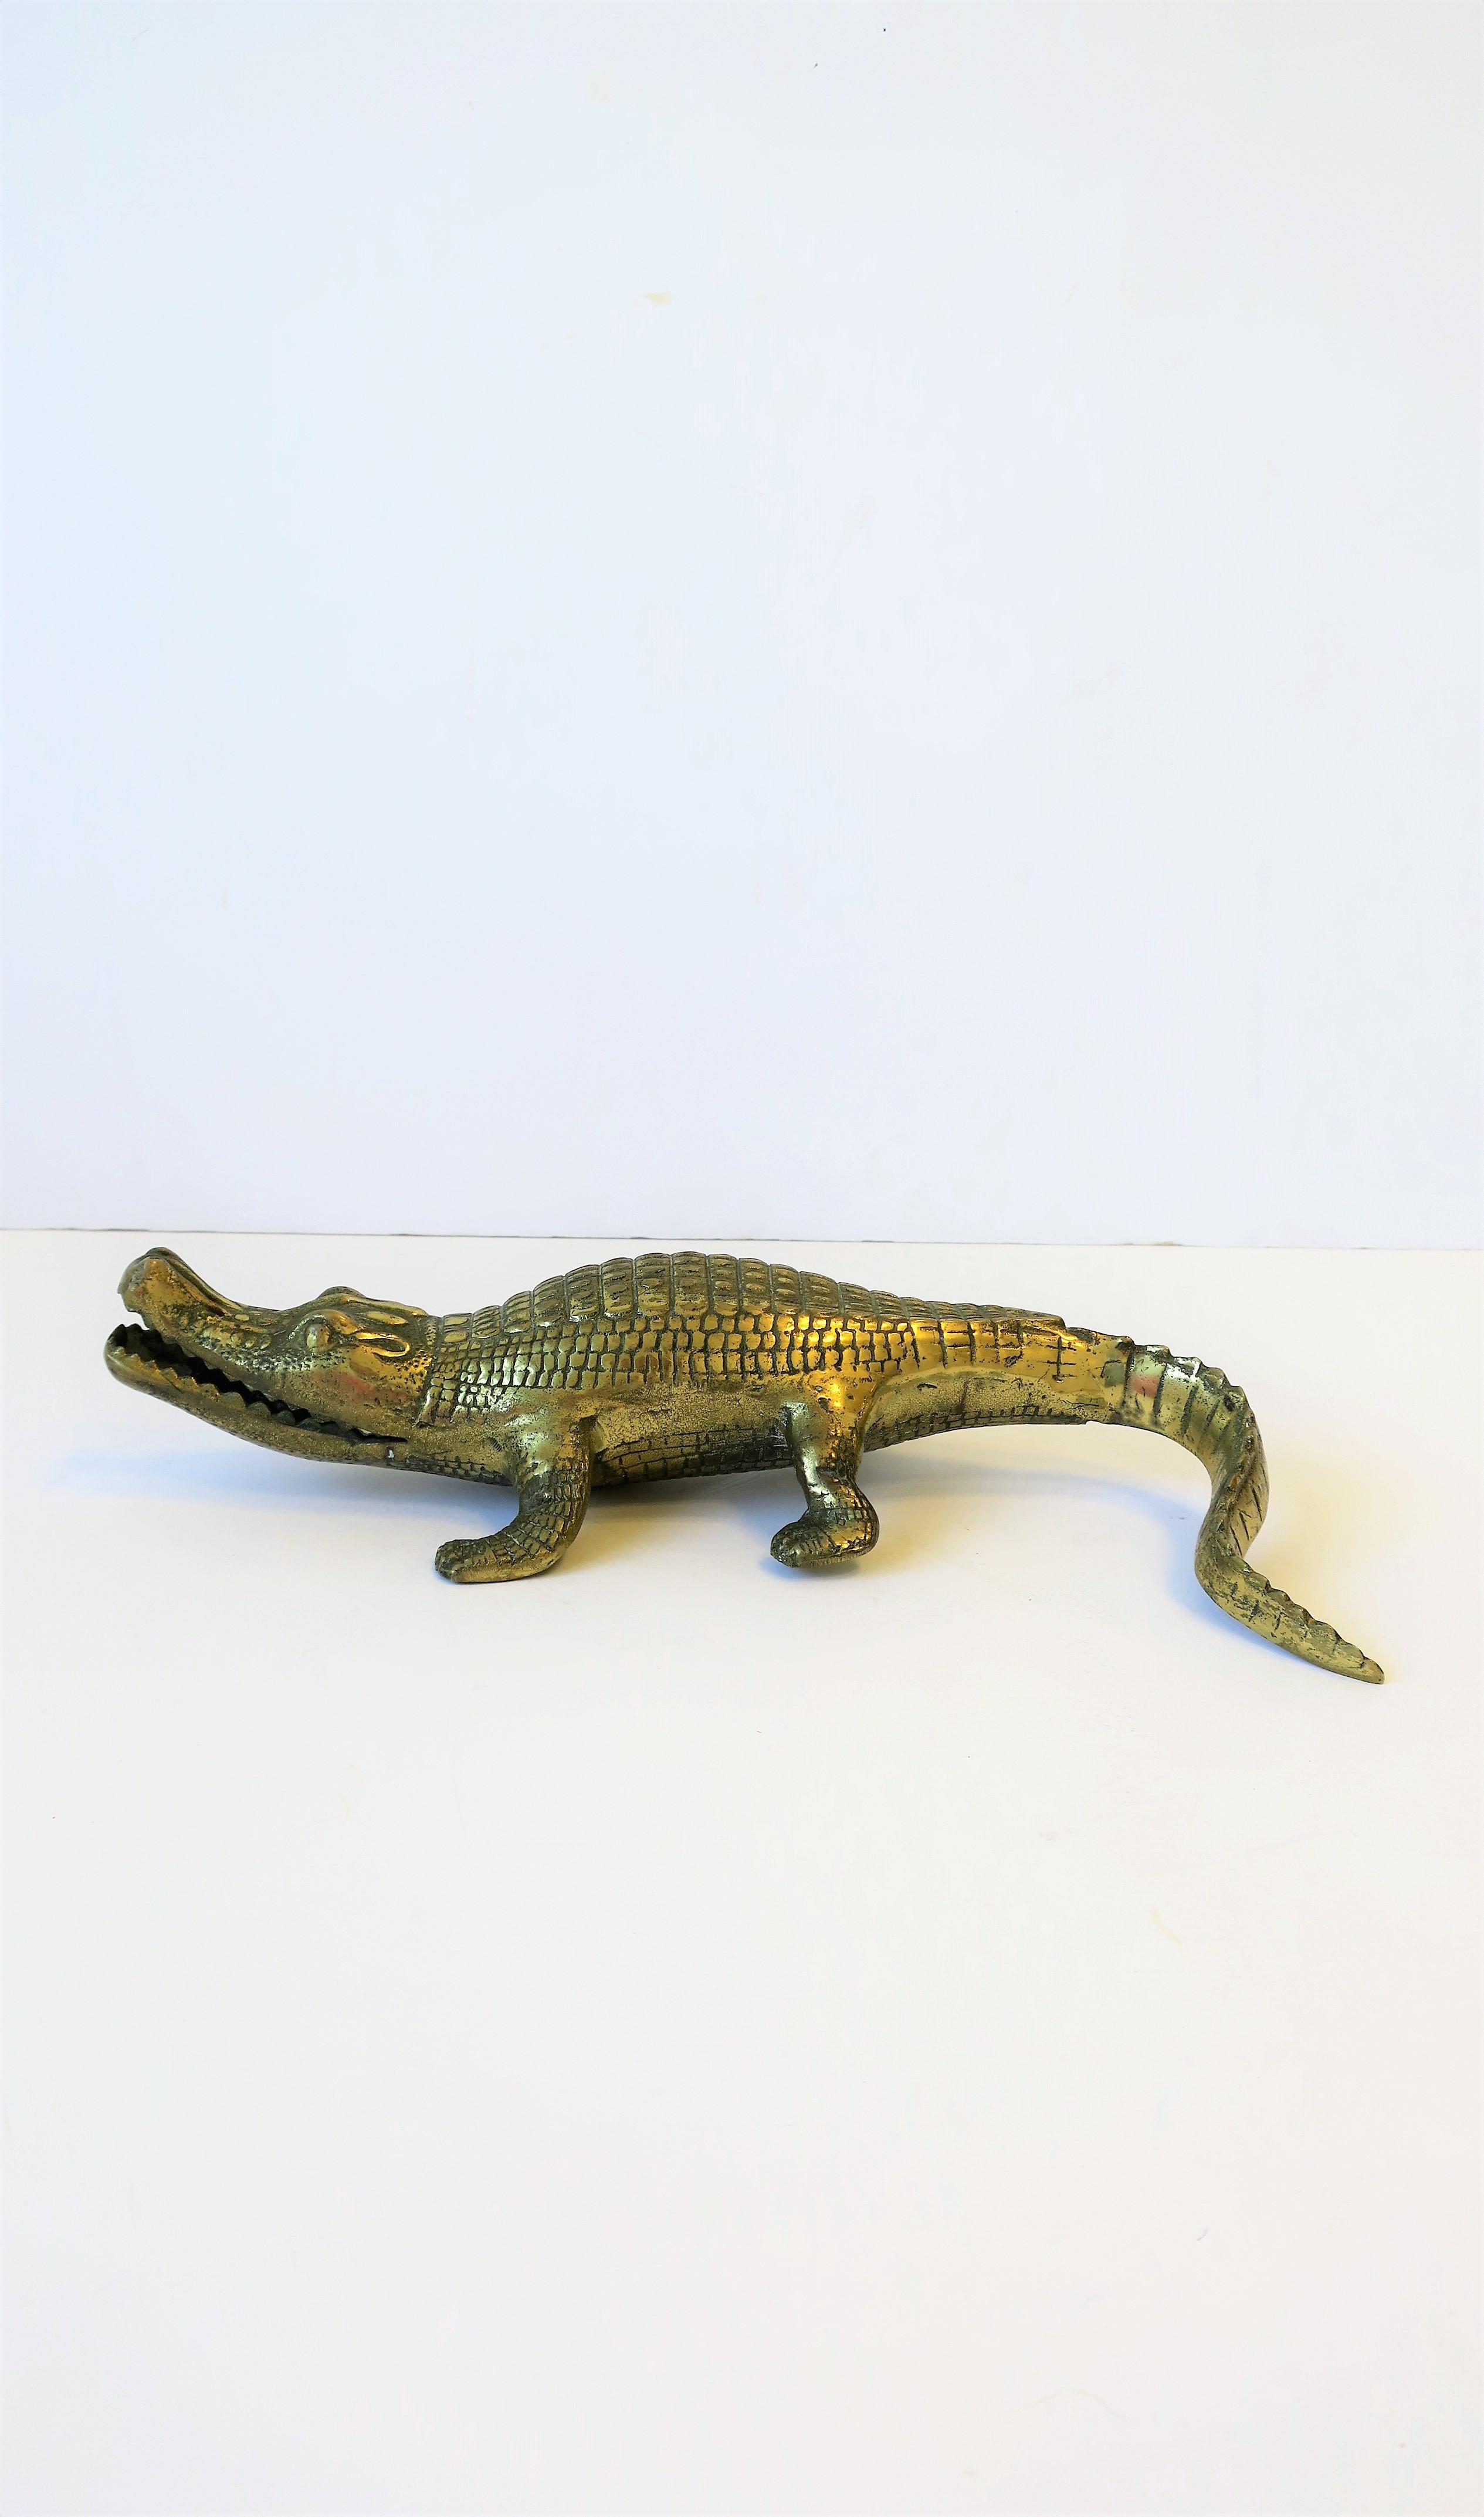 A substantial and well defined brass crocodile or alligator animal sculpture/decorative object. 

Piece measures: 2.75 in. H x 5.5 in. D x 13 in. Long

Lucite/Acrylic side or drinks table featured is also available; search 1stdibs ID #: